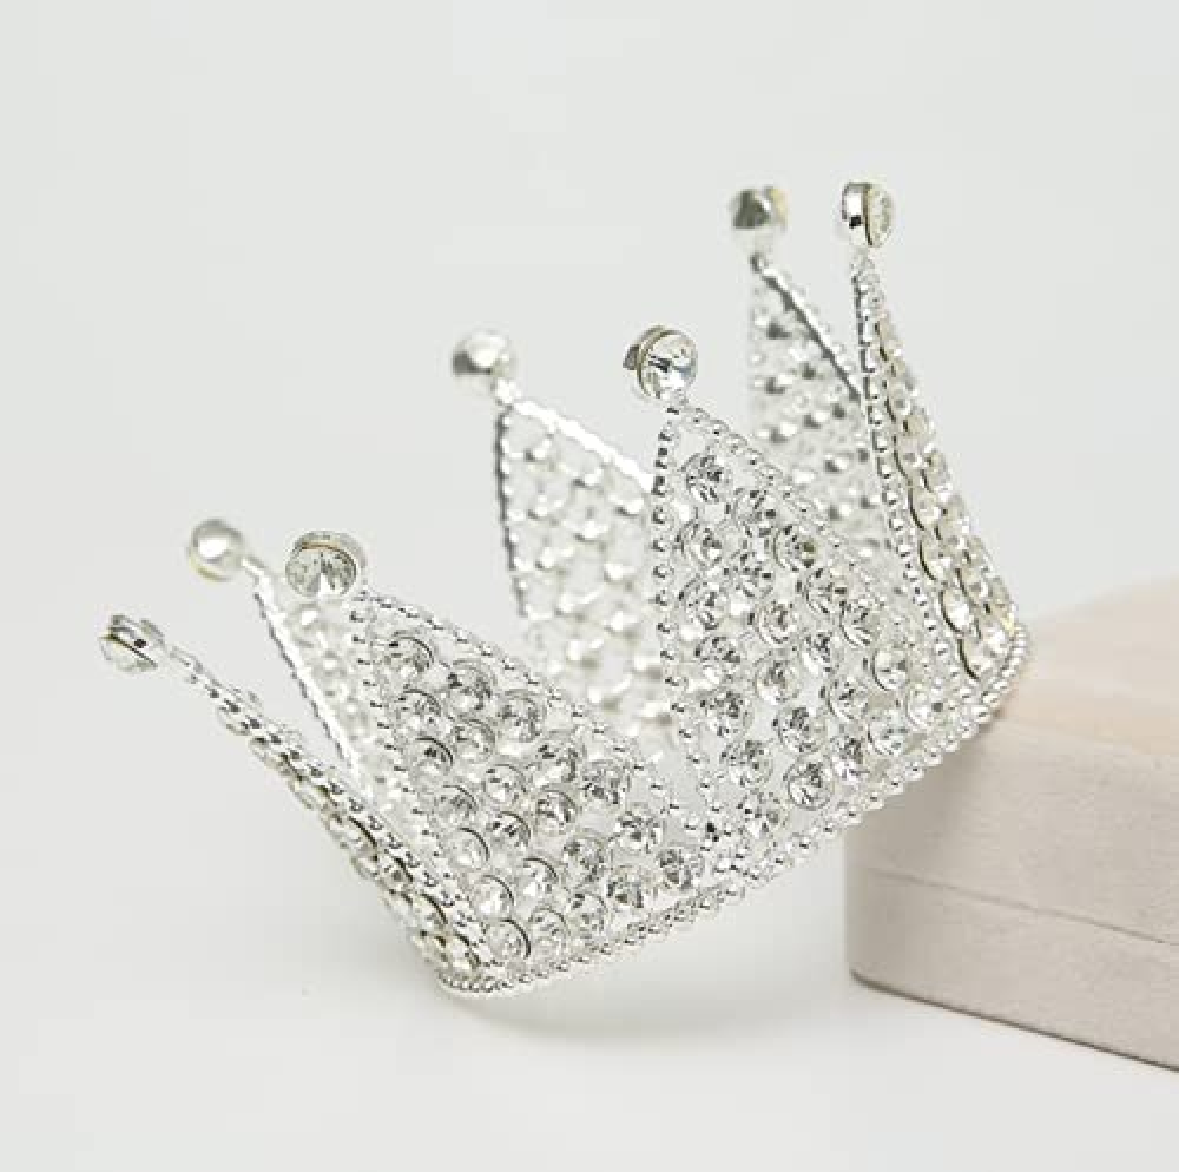 Cake Topper Cake Decorations- Tiara 'Vintage Classic' Crown - silver - Rampant Coffee Company